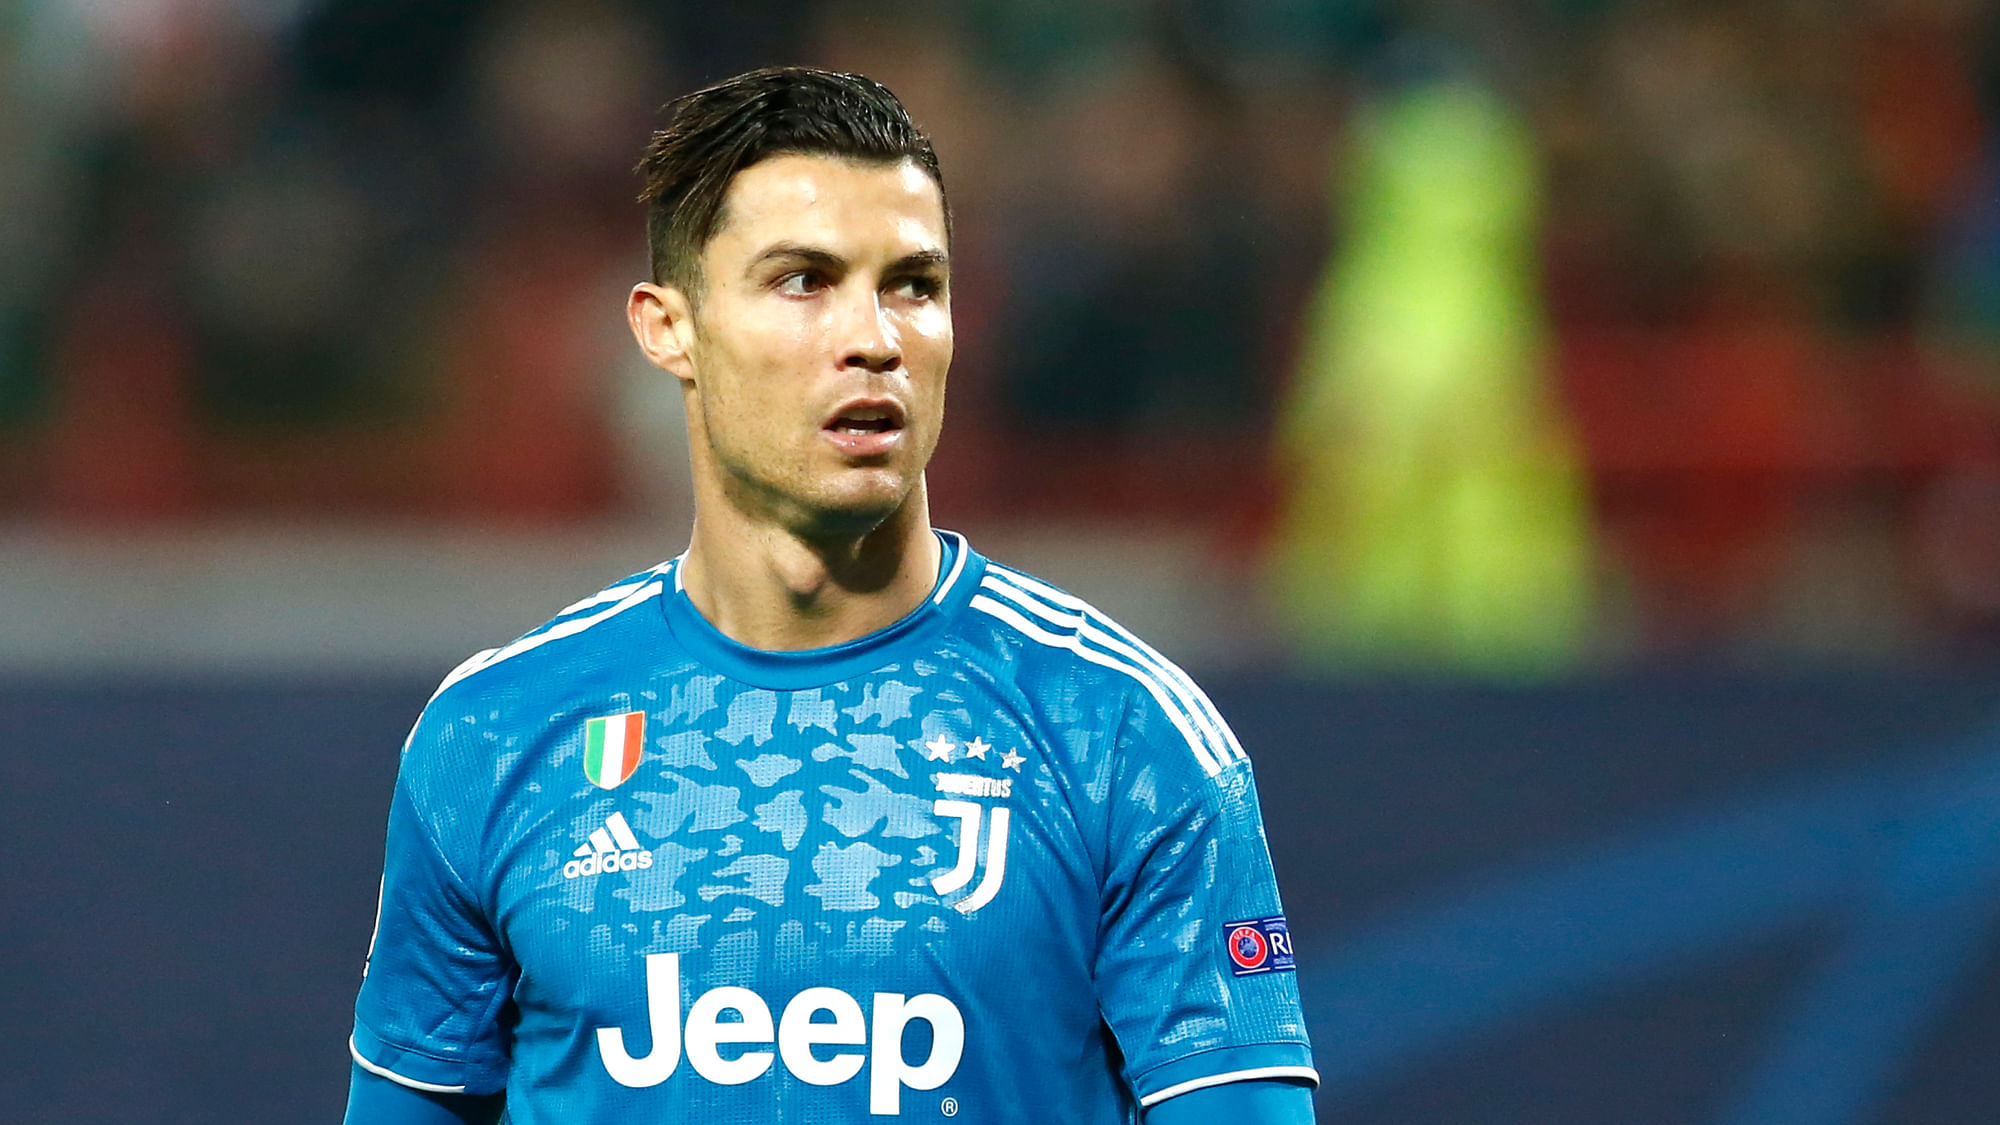 Cristiano Ronaldo has returned to Italy after being locked down in his native Portugal for almost two months.